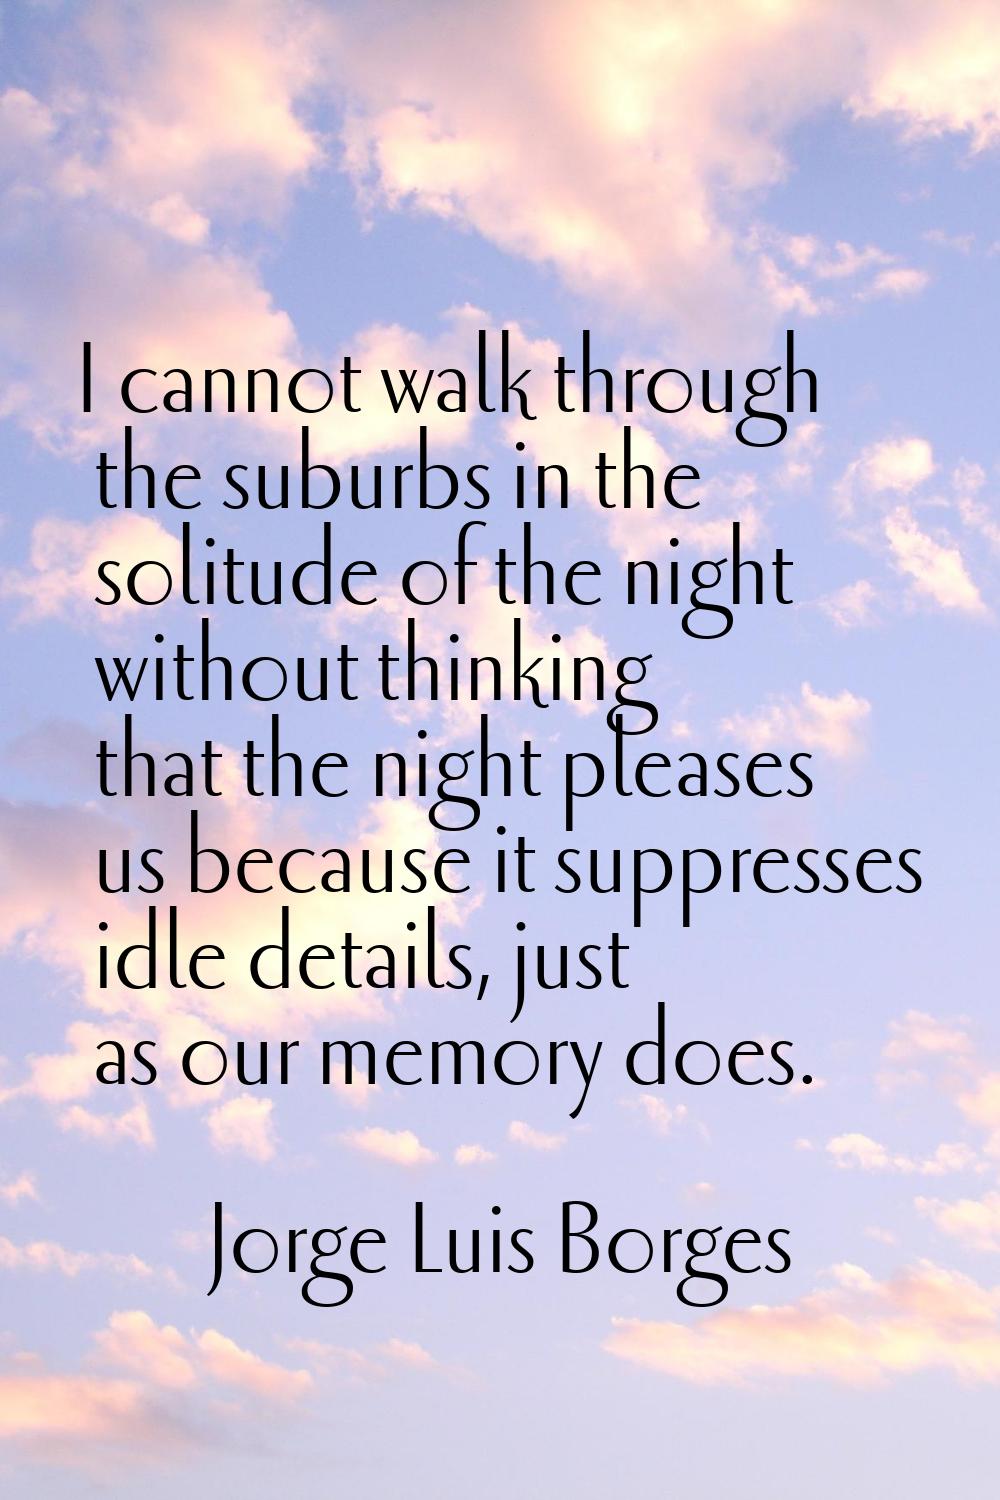 I cannot walk through the suburbs in the solitude of the night without thinking that the night plea